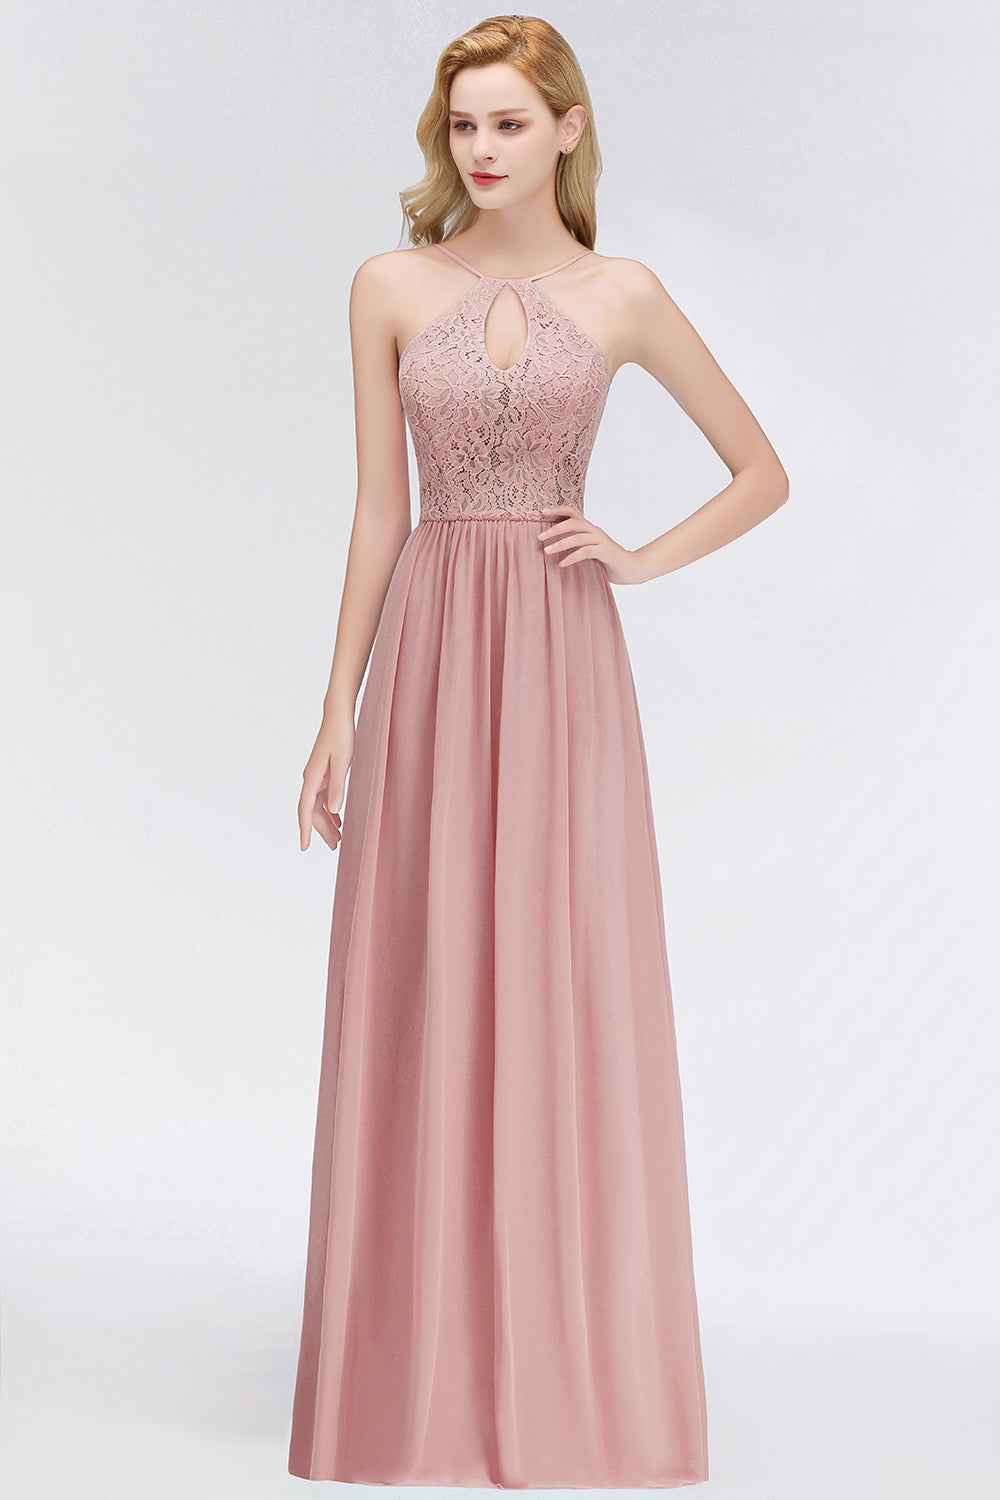 Long Lace Halter Floor-Length Bridesmaid Dresses | Sexy Chiffon Open Back Bridesmaid Dress with Keyhole